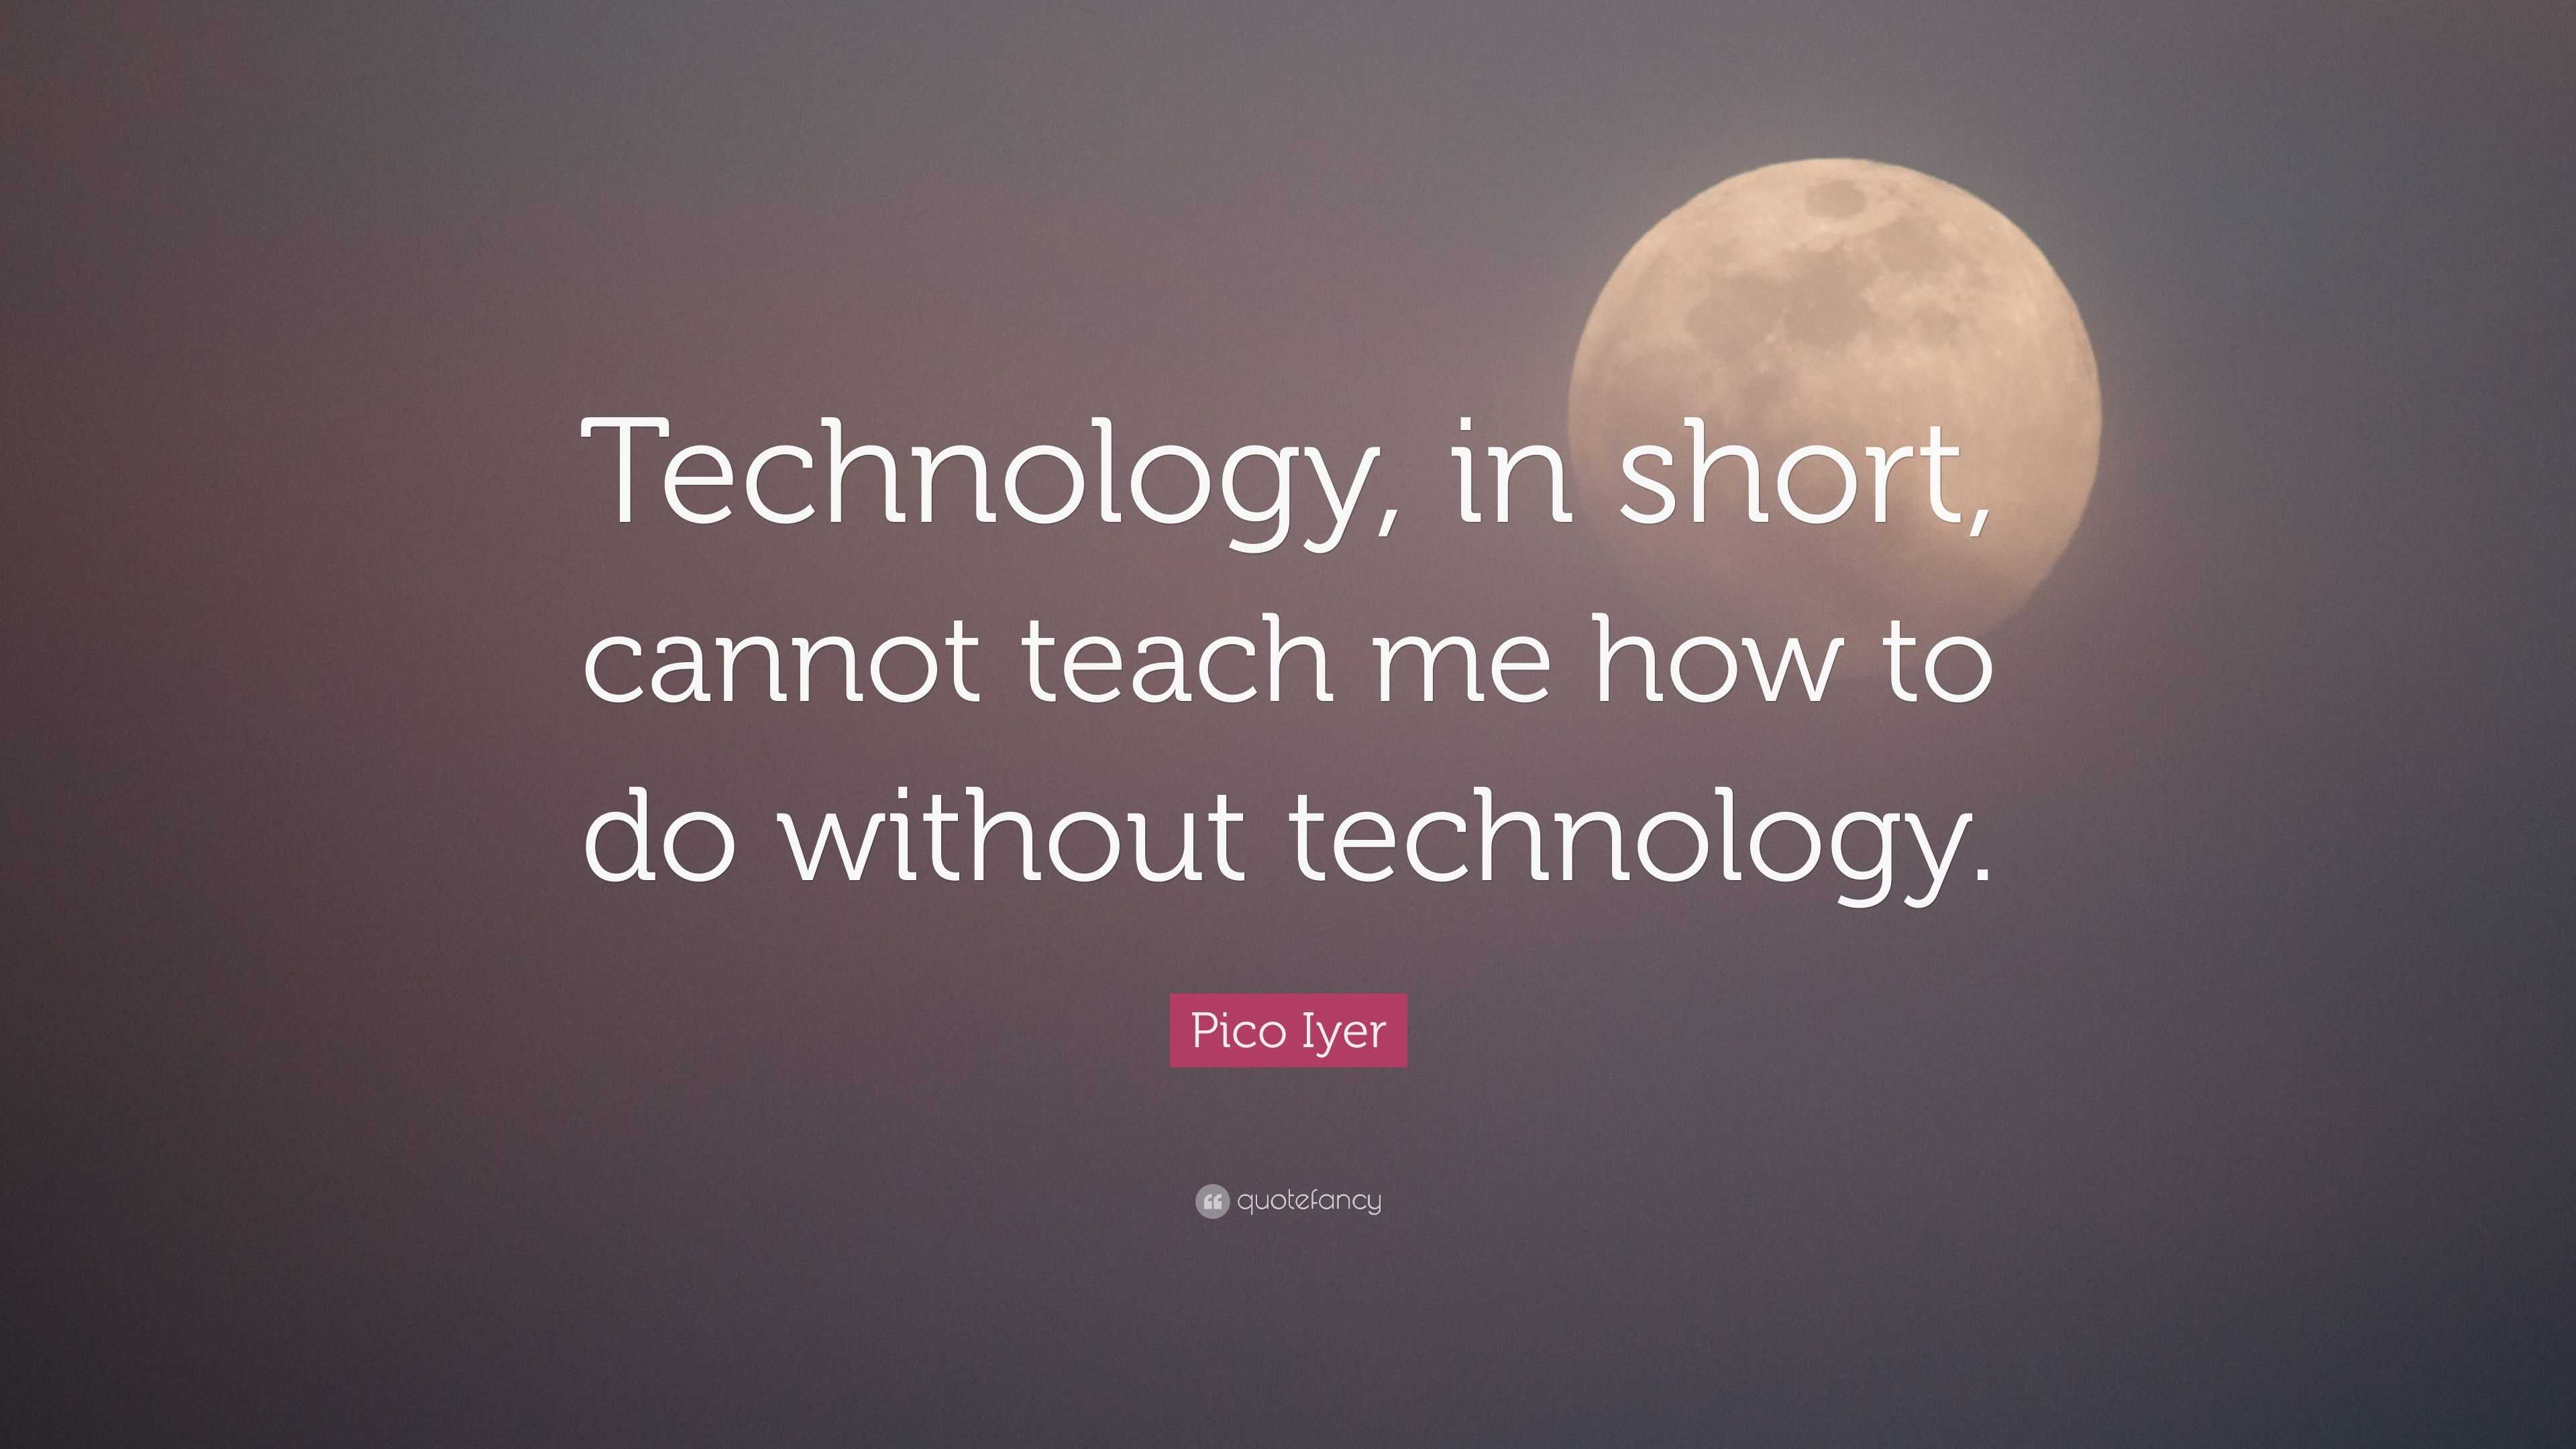 Pico Iyer Quote: “Technology, in short, cannot teach me how to do ...